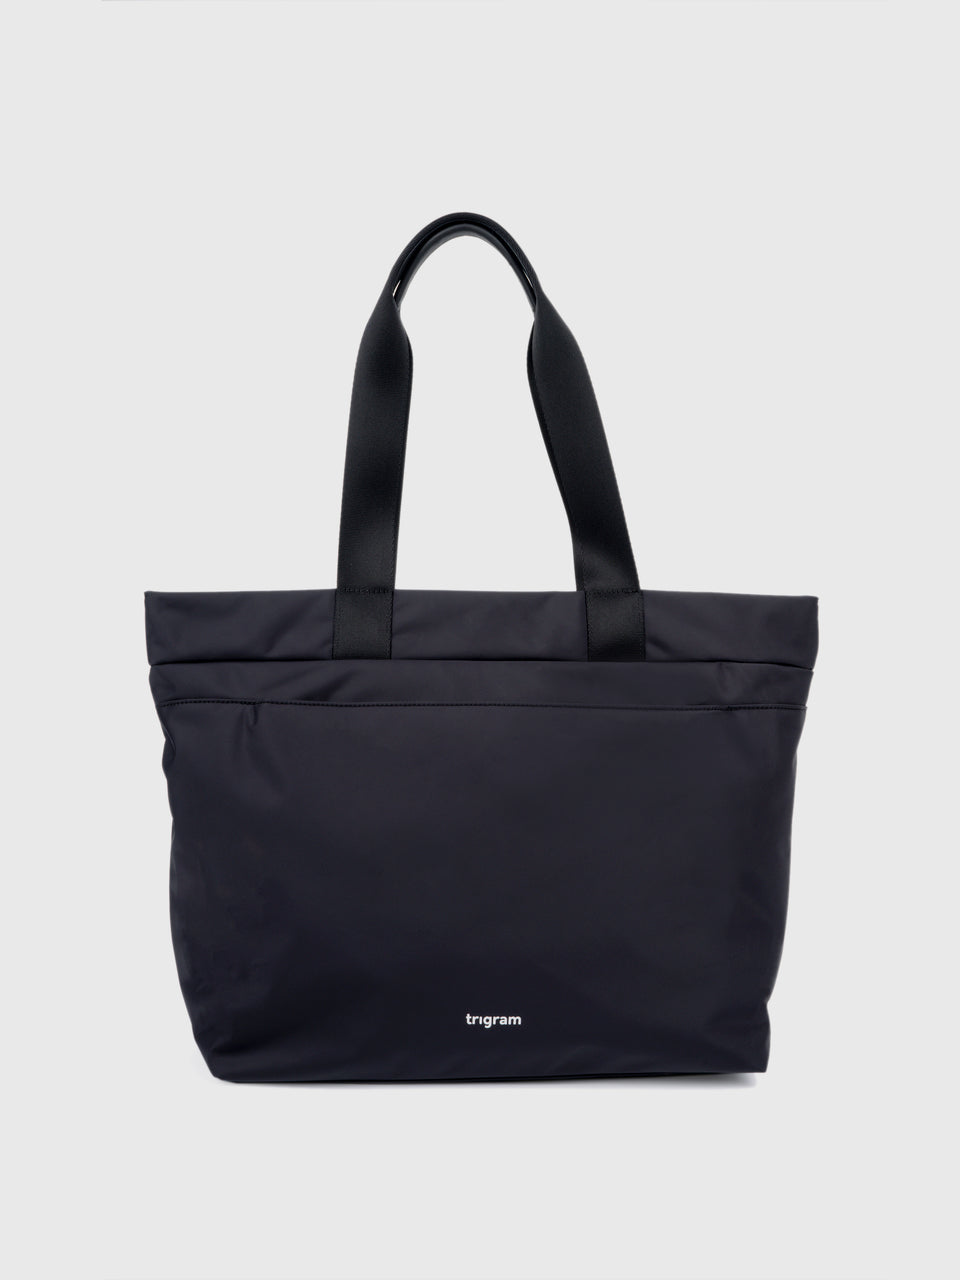 Carry-All Tote Bag - Charcoal Black